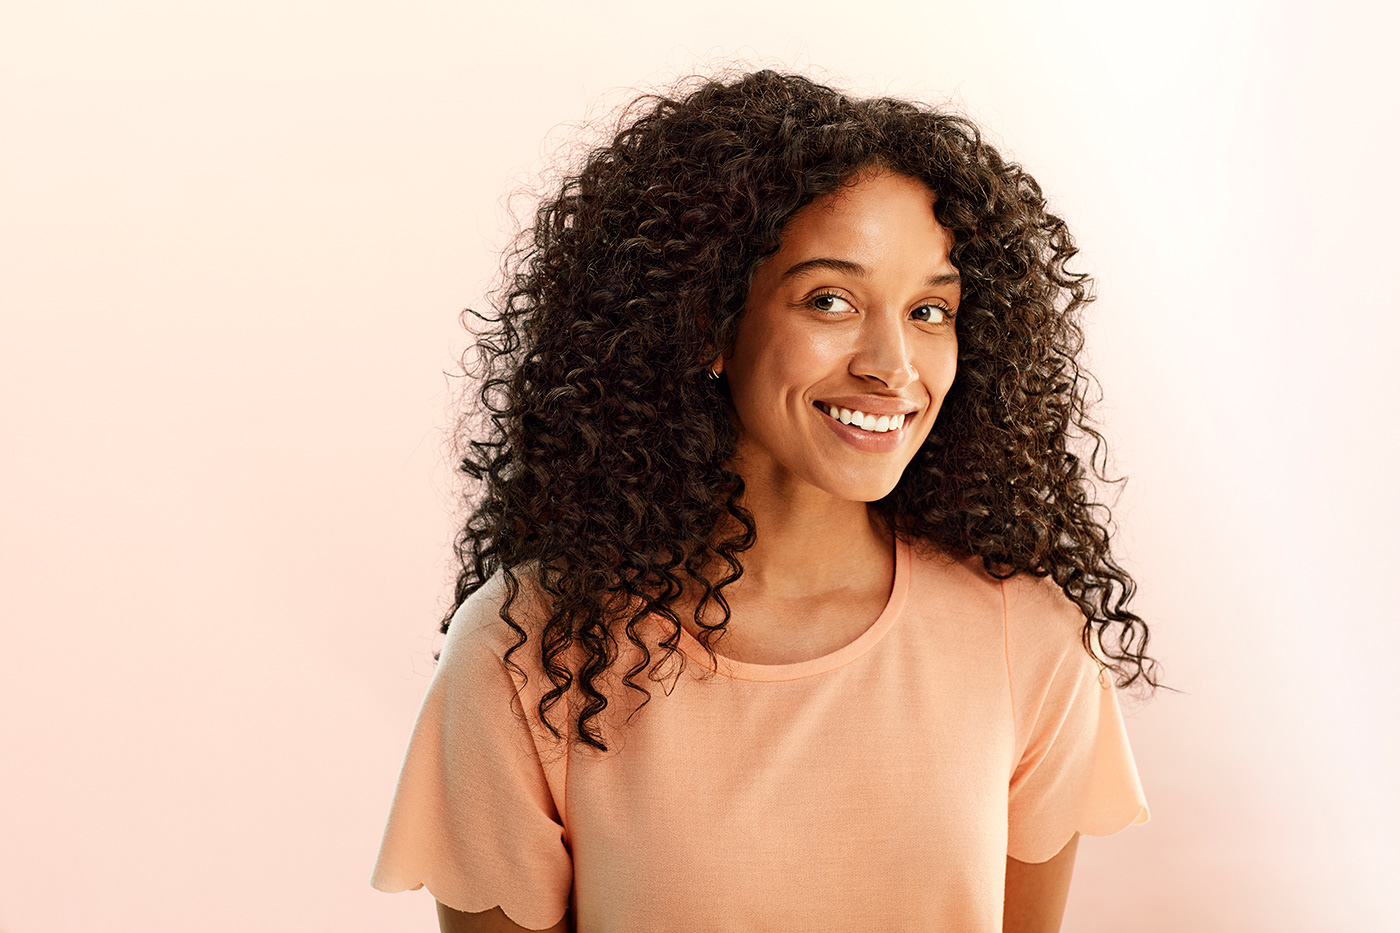 Smiling black woman in peach colored short sleeve shirt. Light cream background.